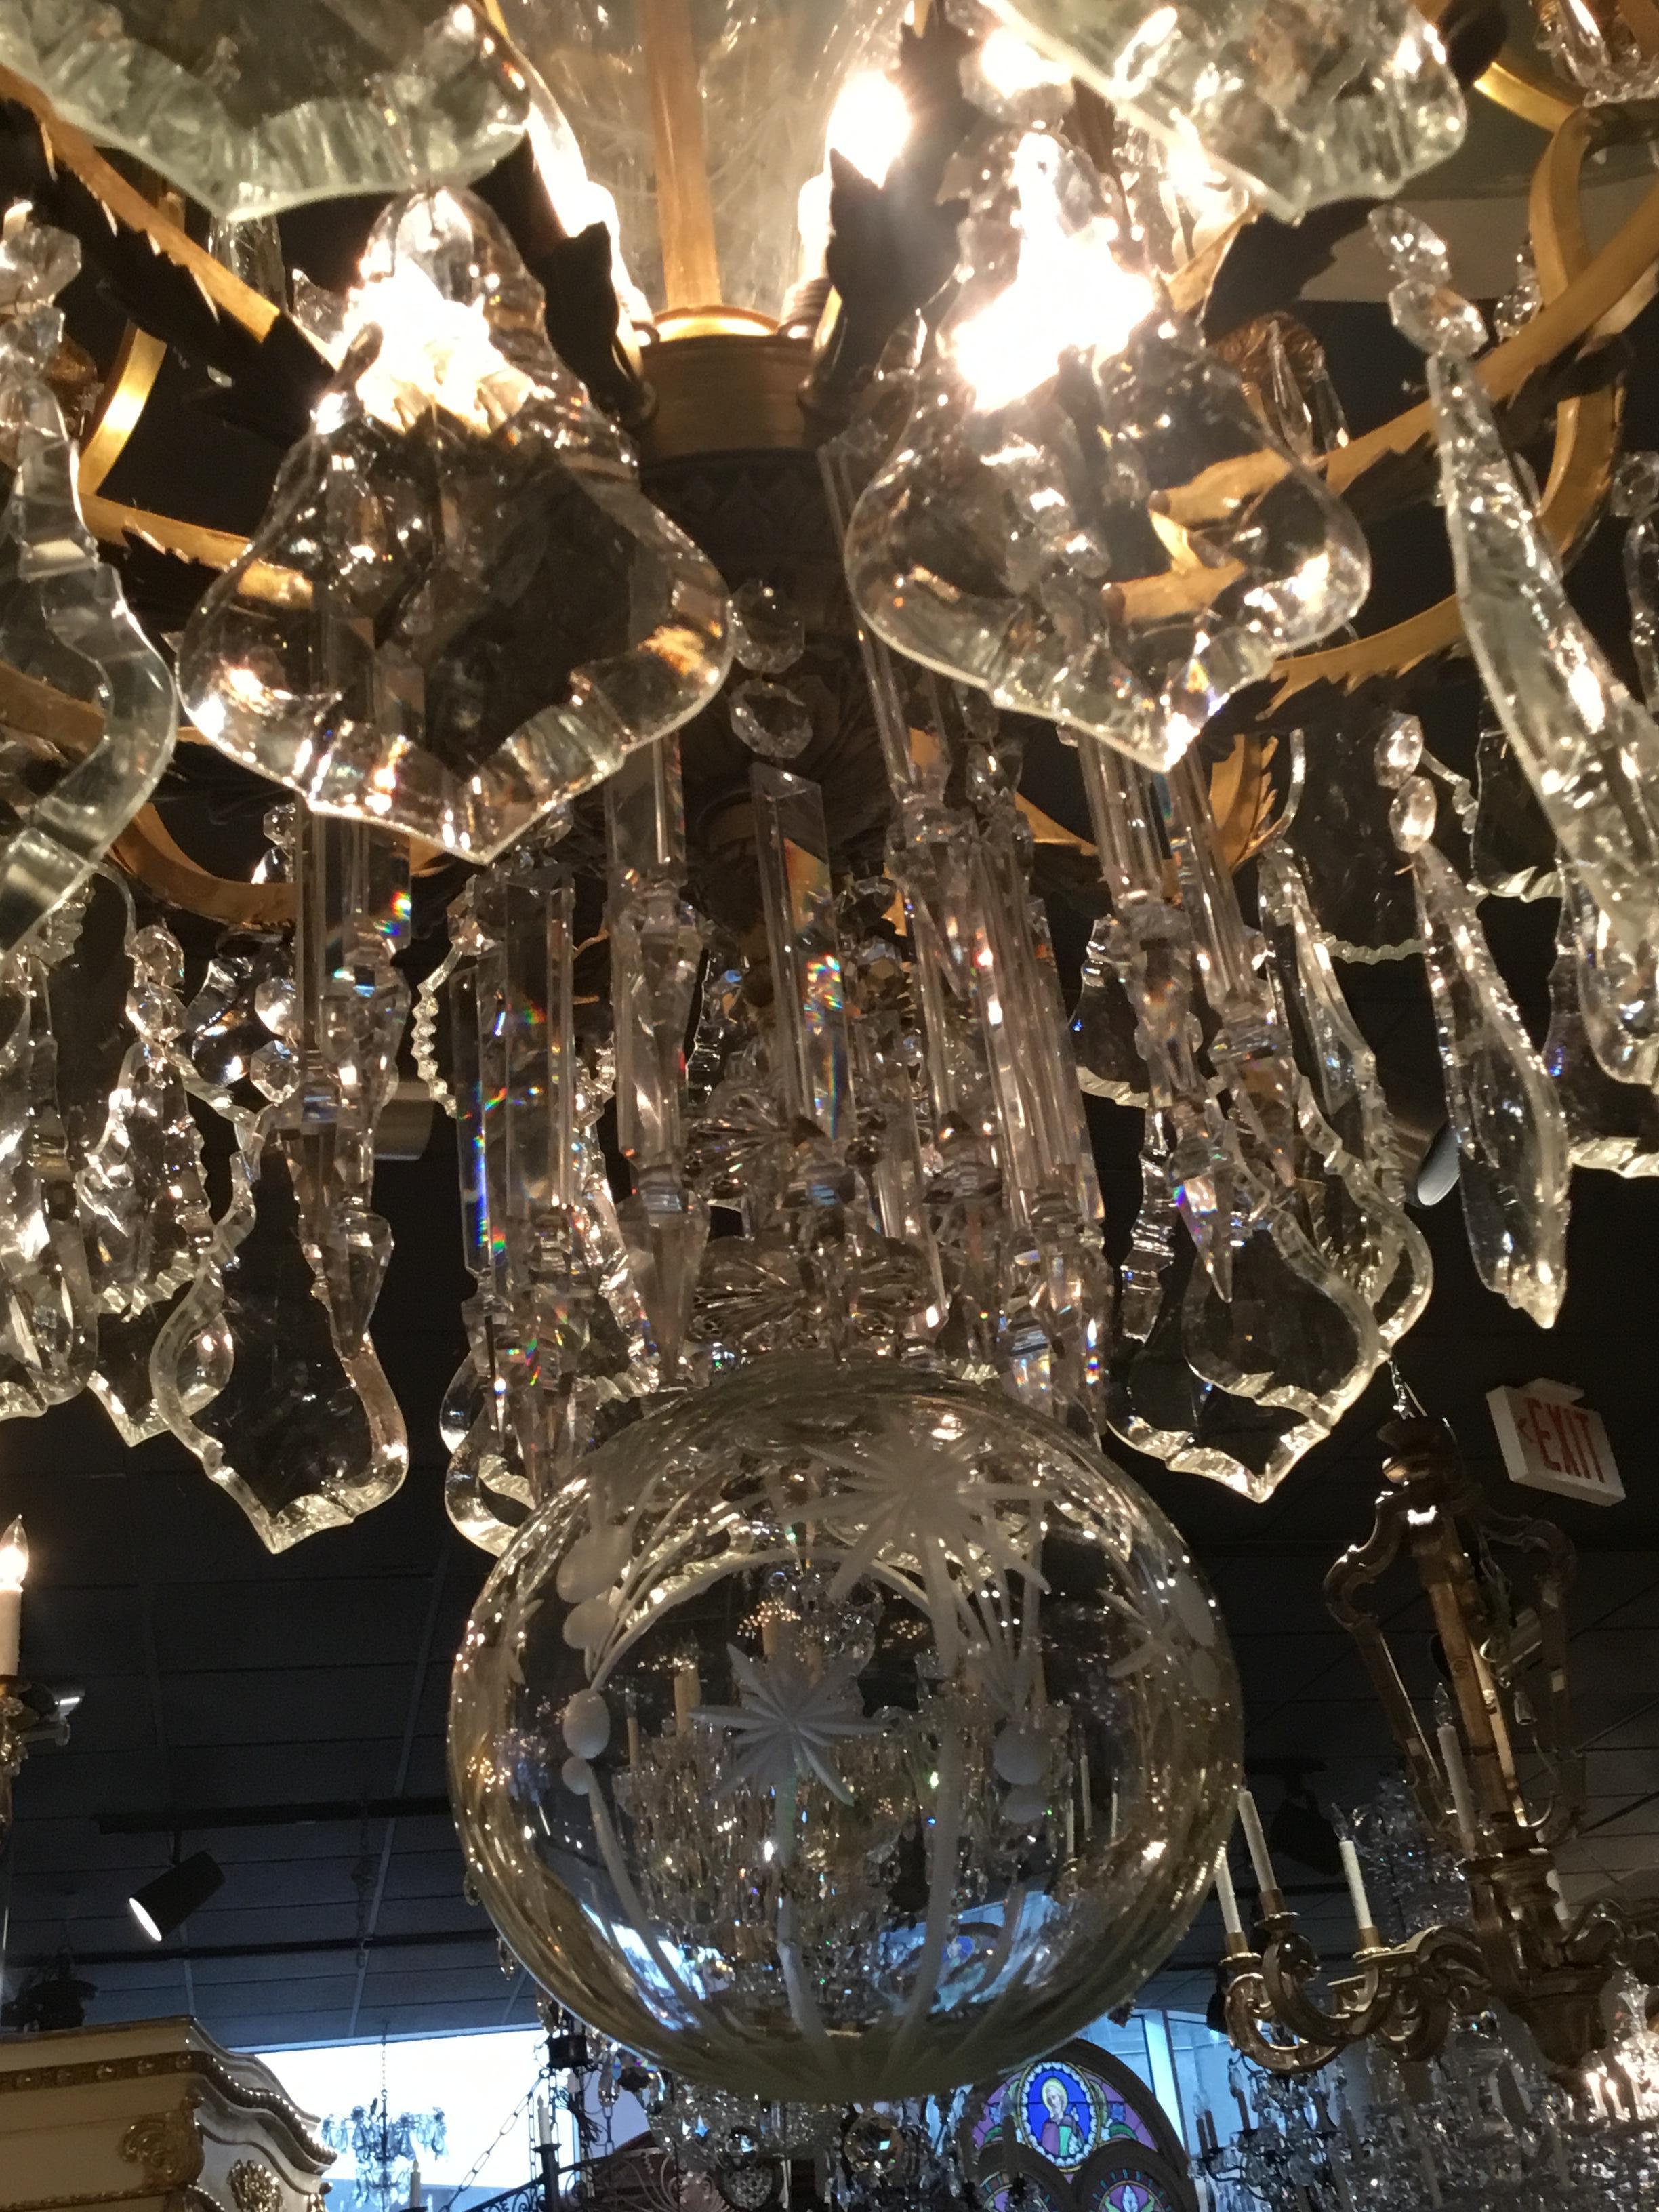 Incredible large bronze and crystal chandelier with etched crystal stem
And etched crystal ball. Large shaped crystals with draping adorn this
Spectacular piece. Eight up lights and twelve candle lights surround
The perimeter to make the lighting